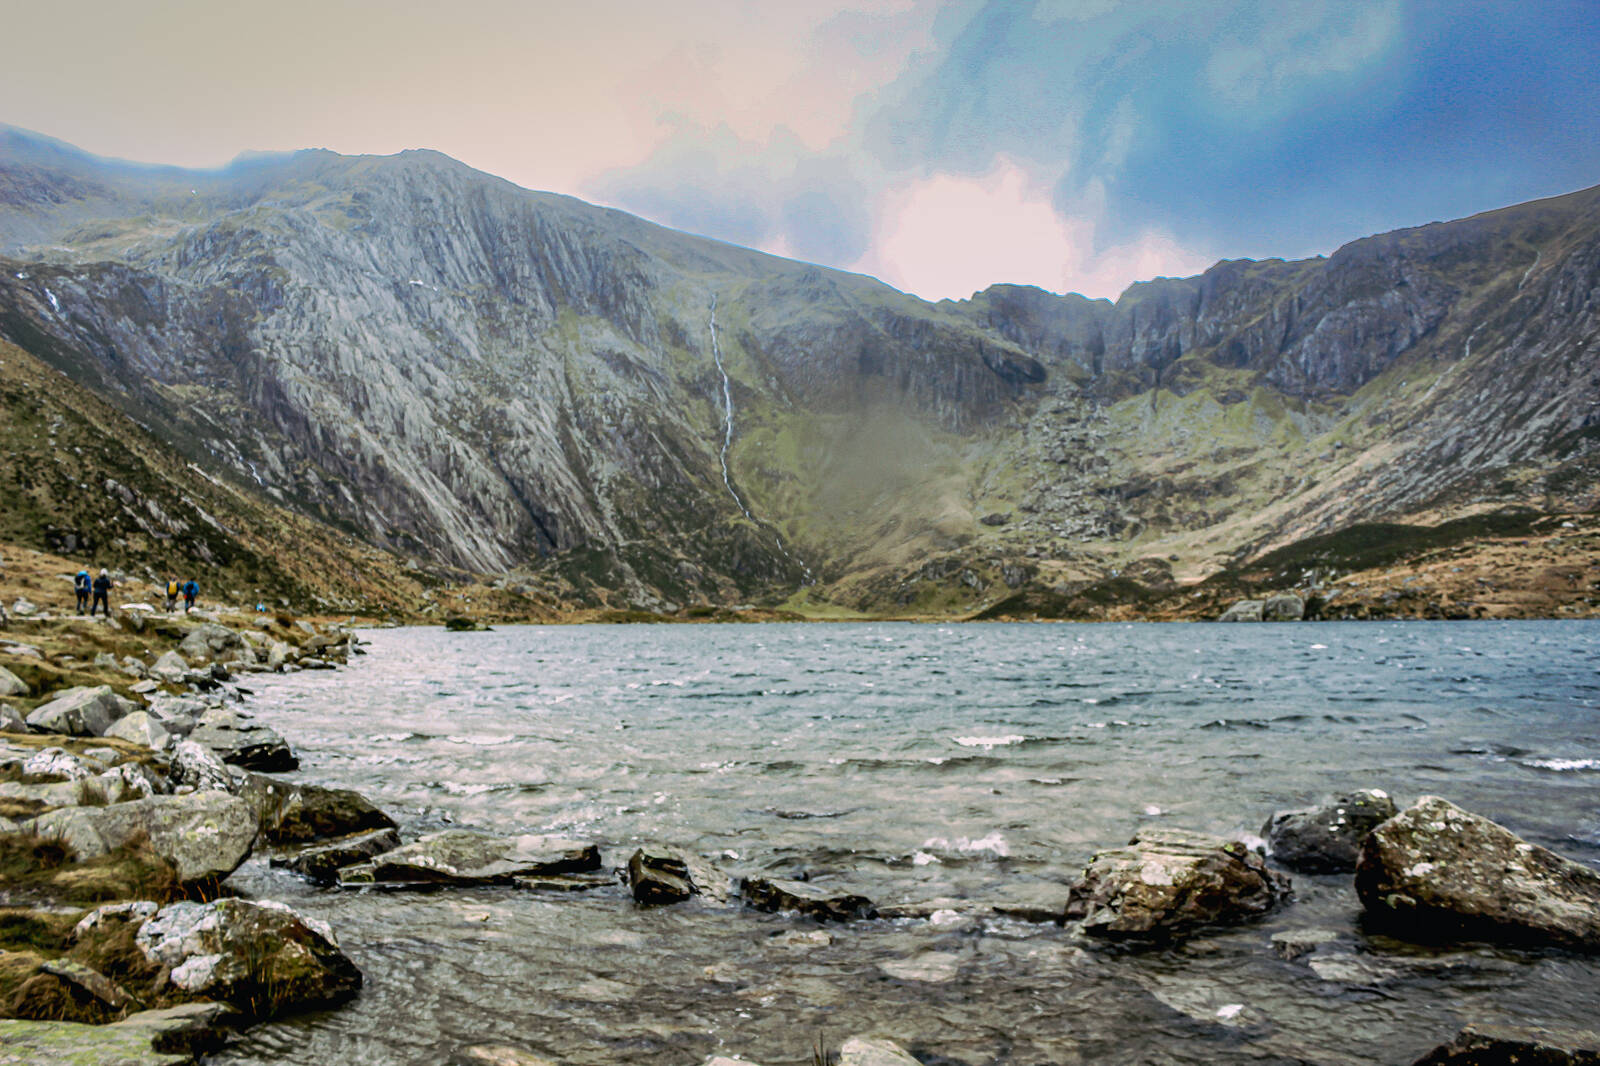 Image of Cwm Idwal by Paul Shields